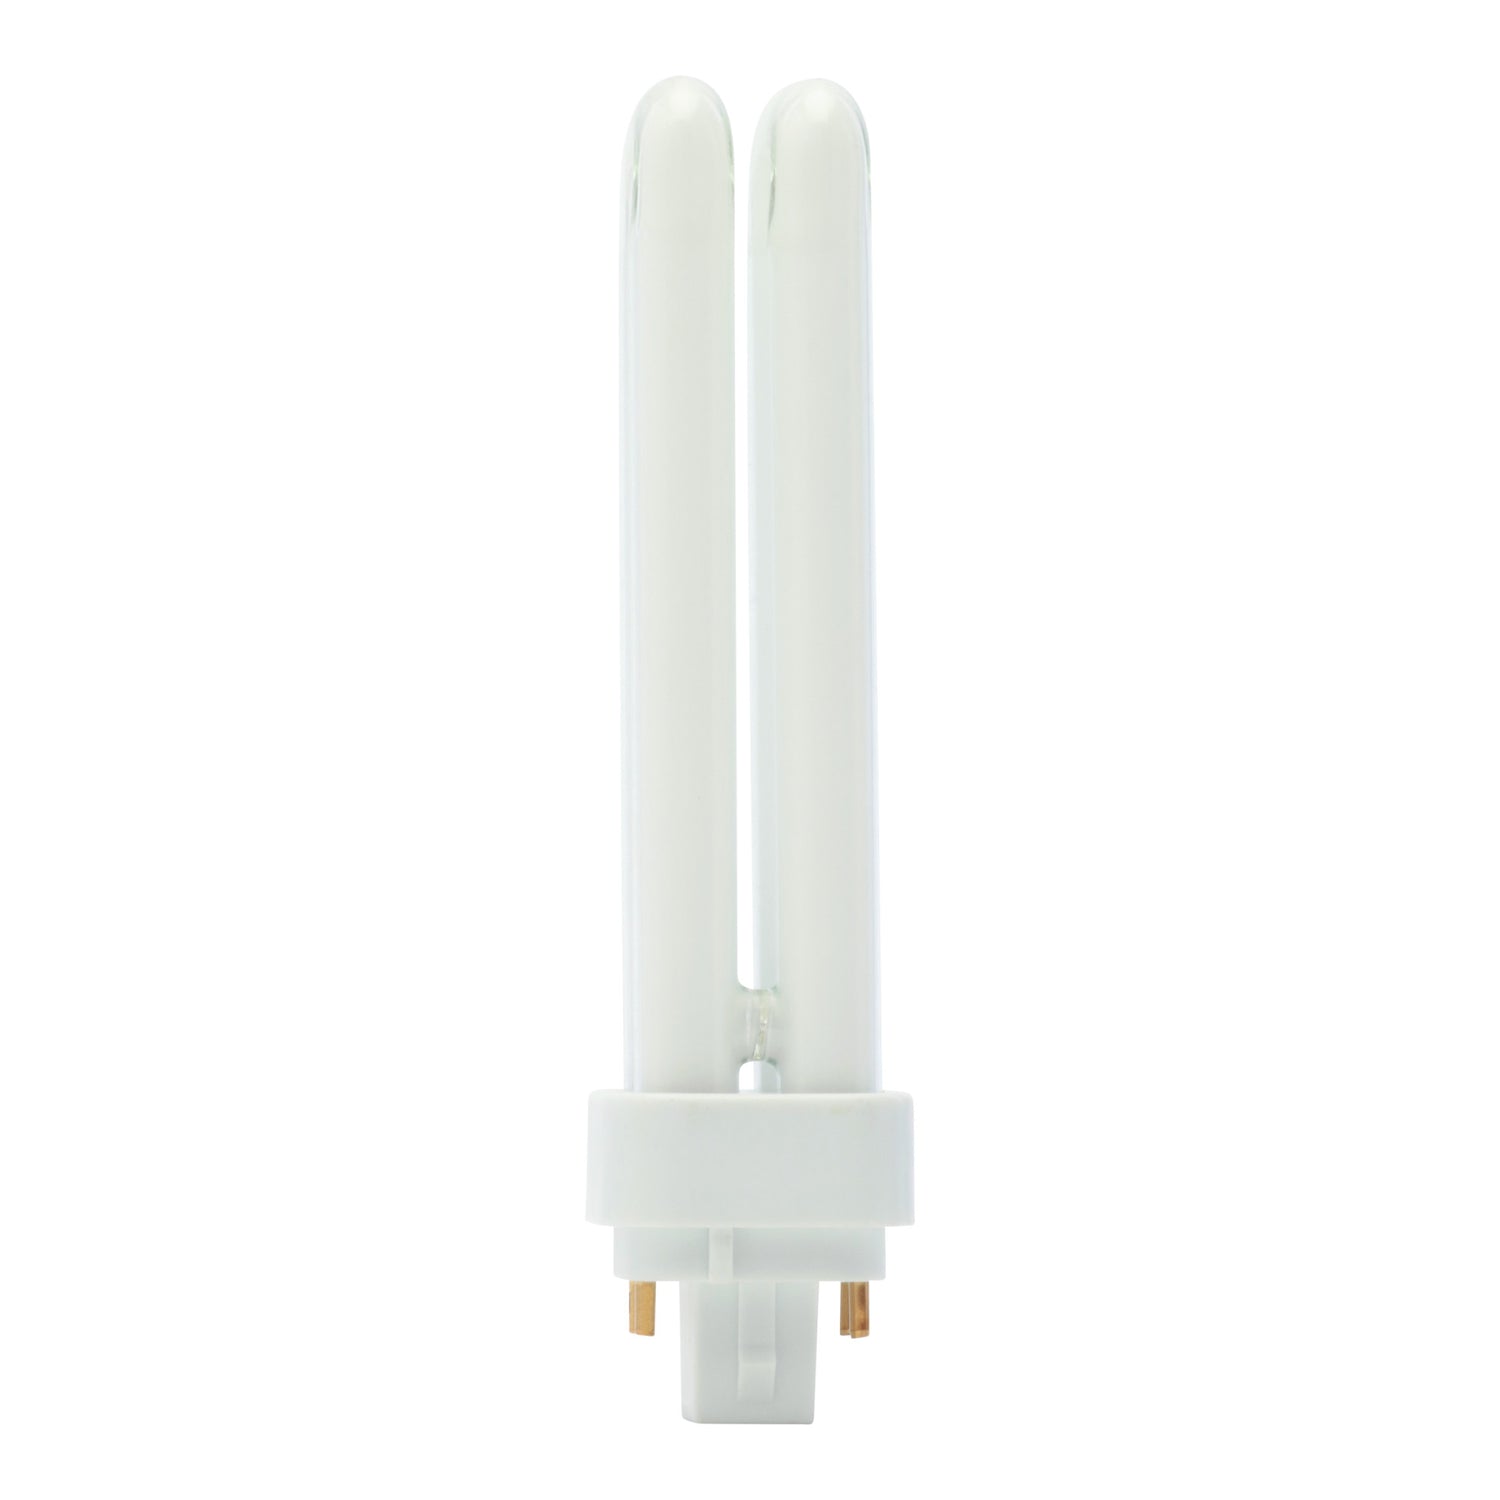 18W Soft White (2700K) G24Q-2 Double Twin Tube PL Non-Dimmable CFL Light Bulb